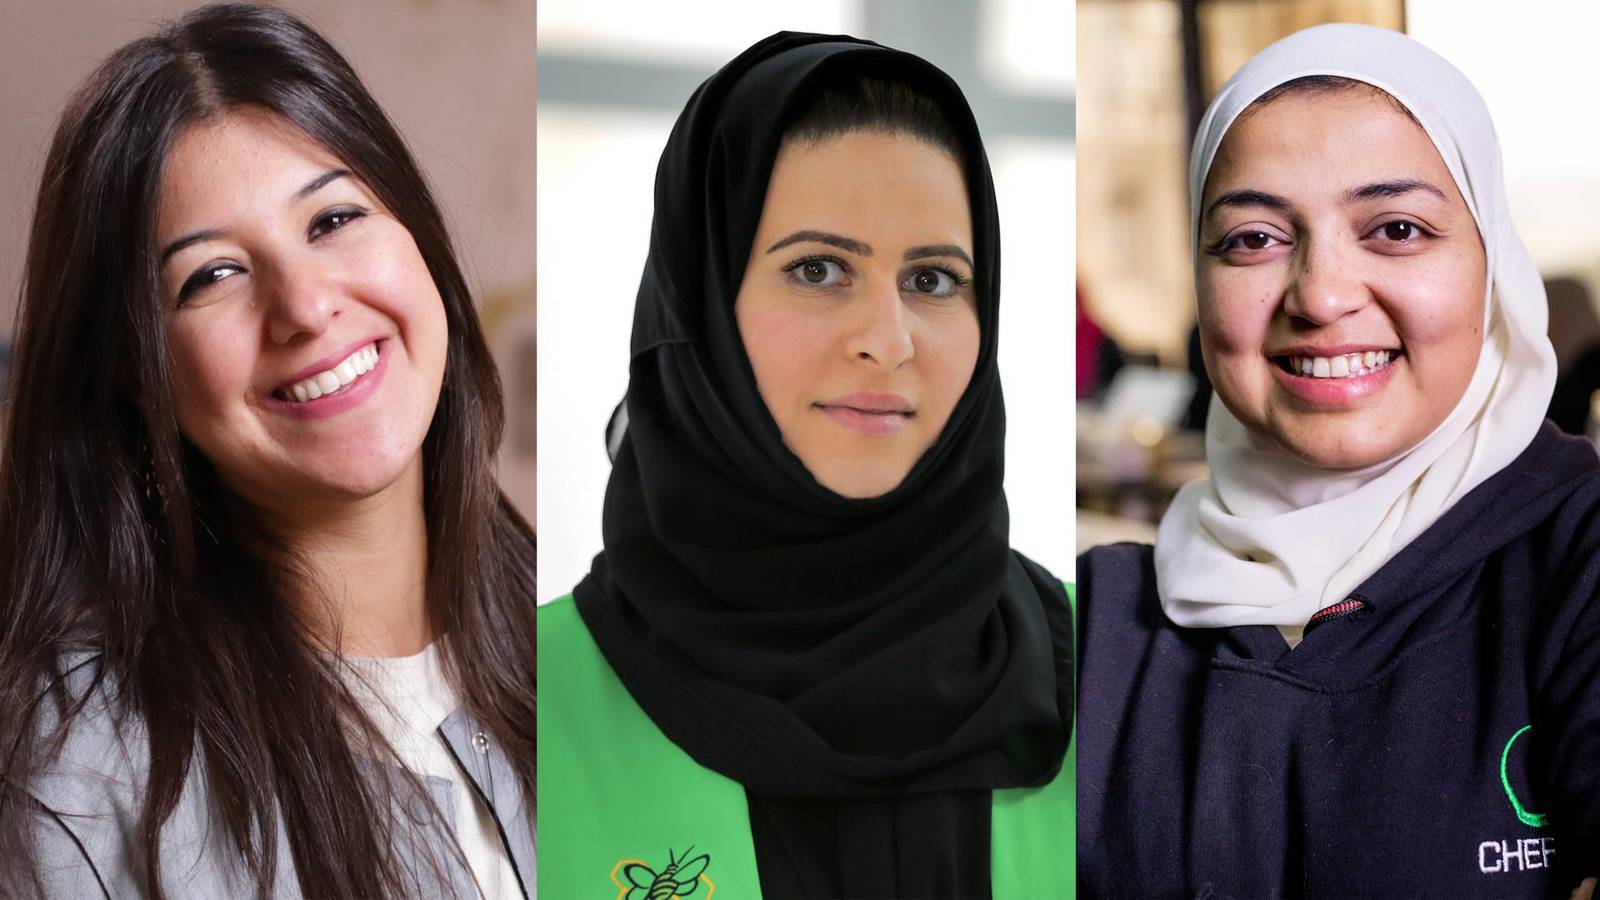 How three Middle Eastern women are changing the world through healthcare